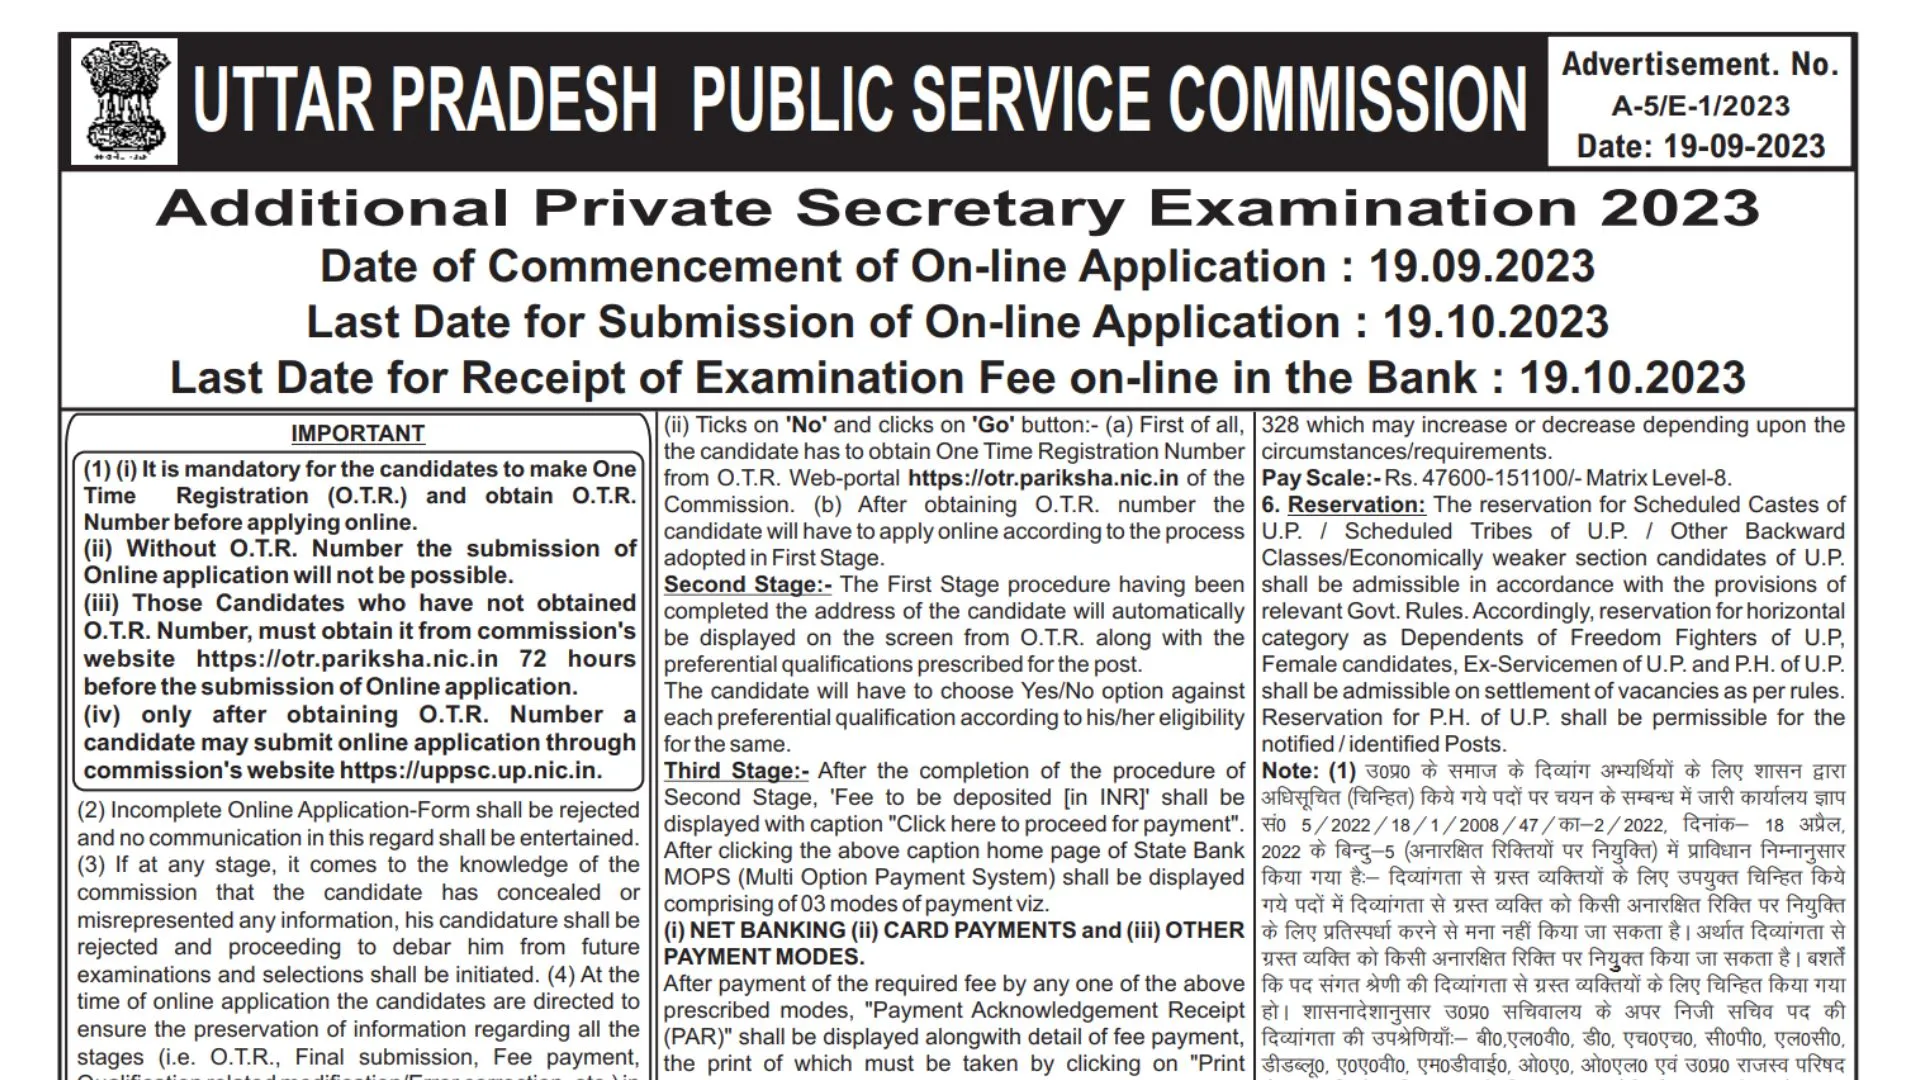 UPPSC Additional Private Secretary Notification 2023, Apply Now for 328 Vacancies